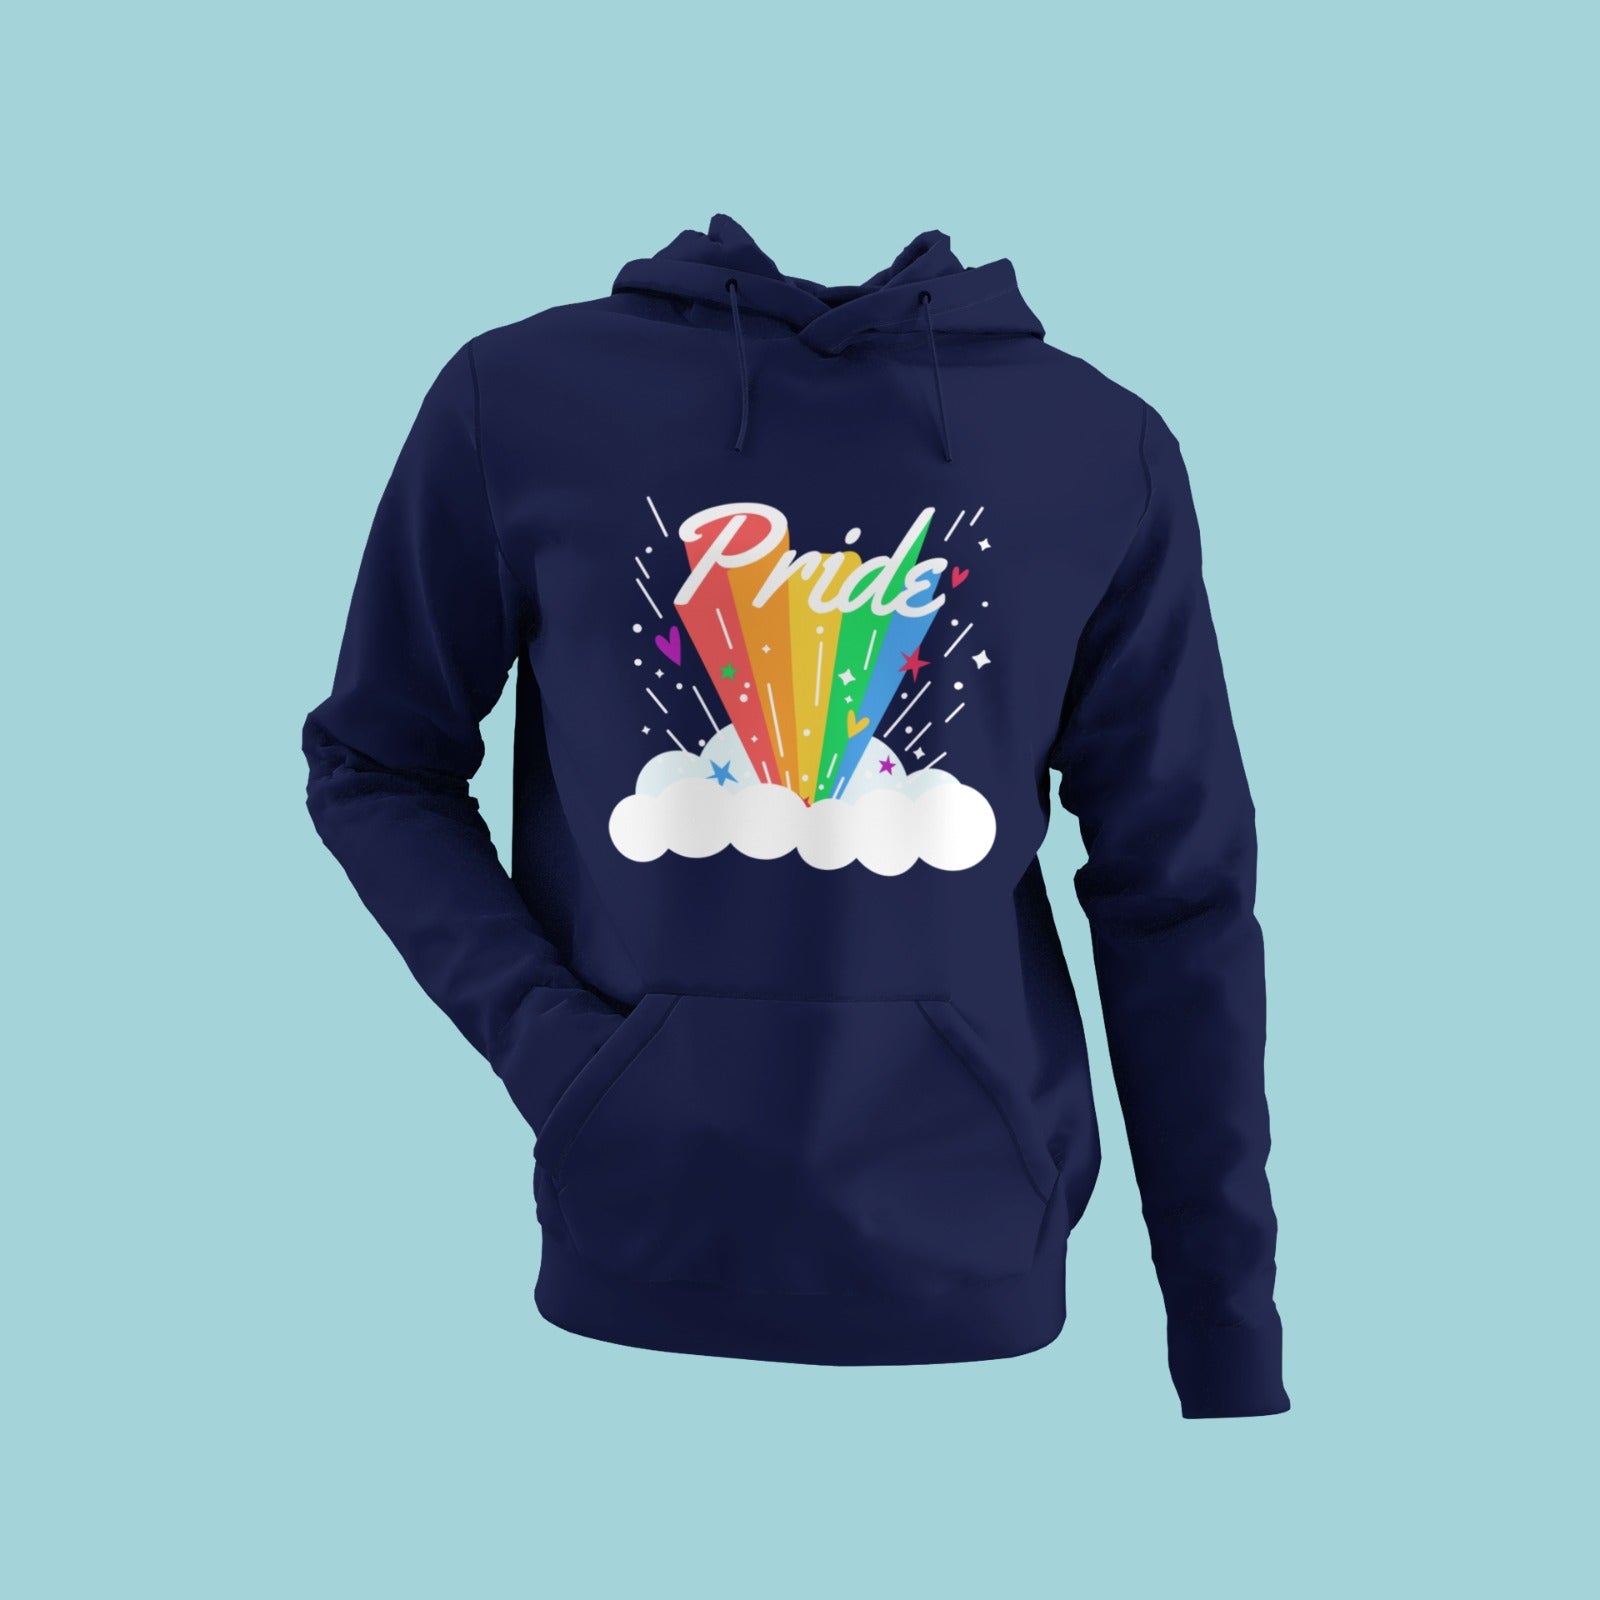 Unleash your inner Pride with our navy blue hoodie featuring a graphic design of Pride emerging from a cloud with a rainbow trail. Celebrate diversity and love in style with this comfortable and trendy hoodie. Perfect for any occasion, show your support for the LGBTQ+ community with this bold statement piece.